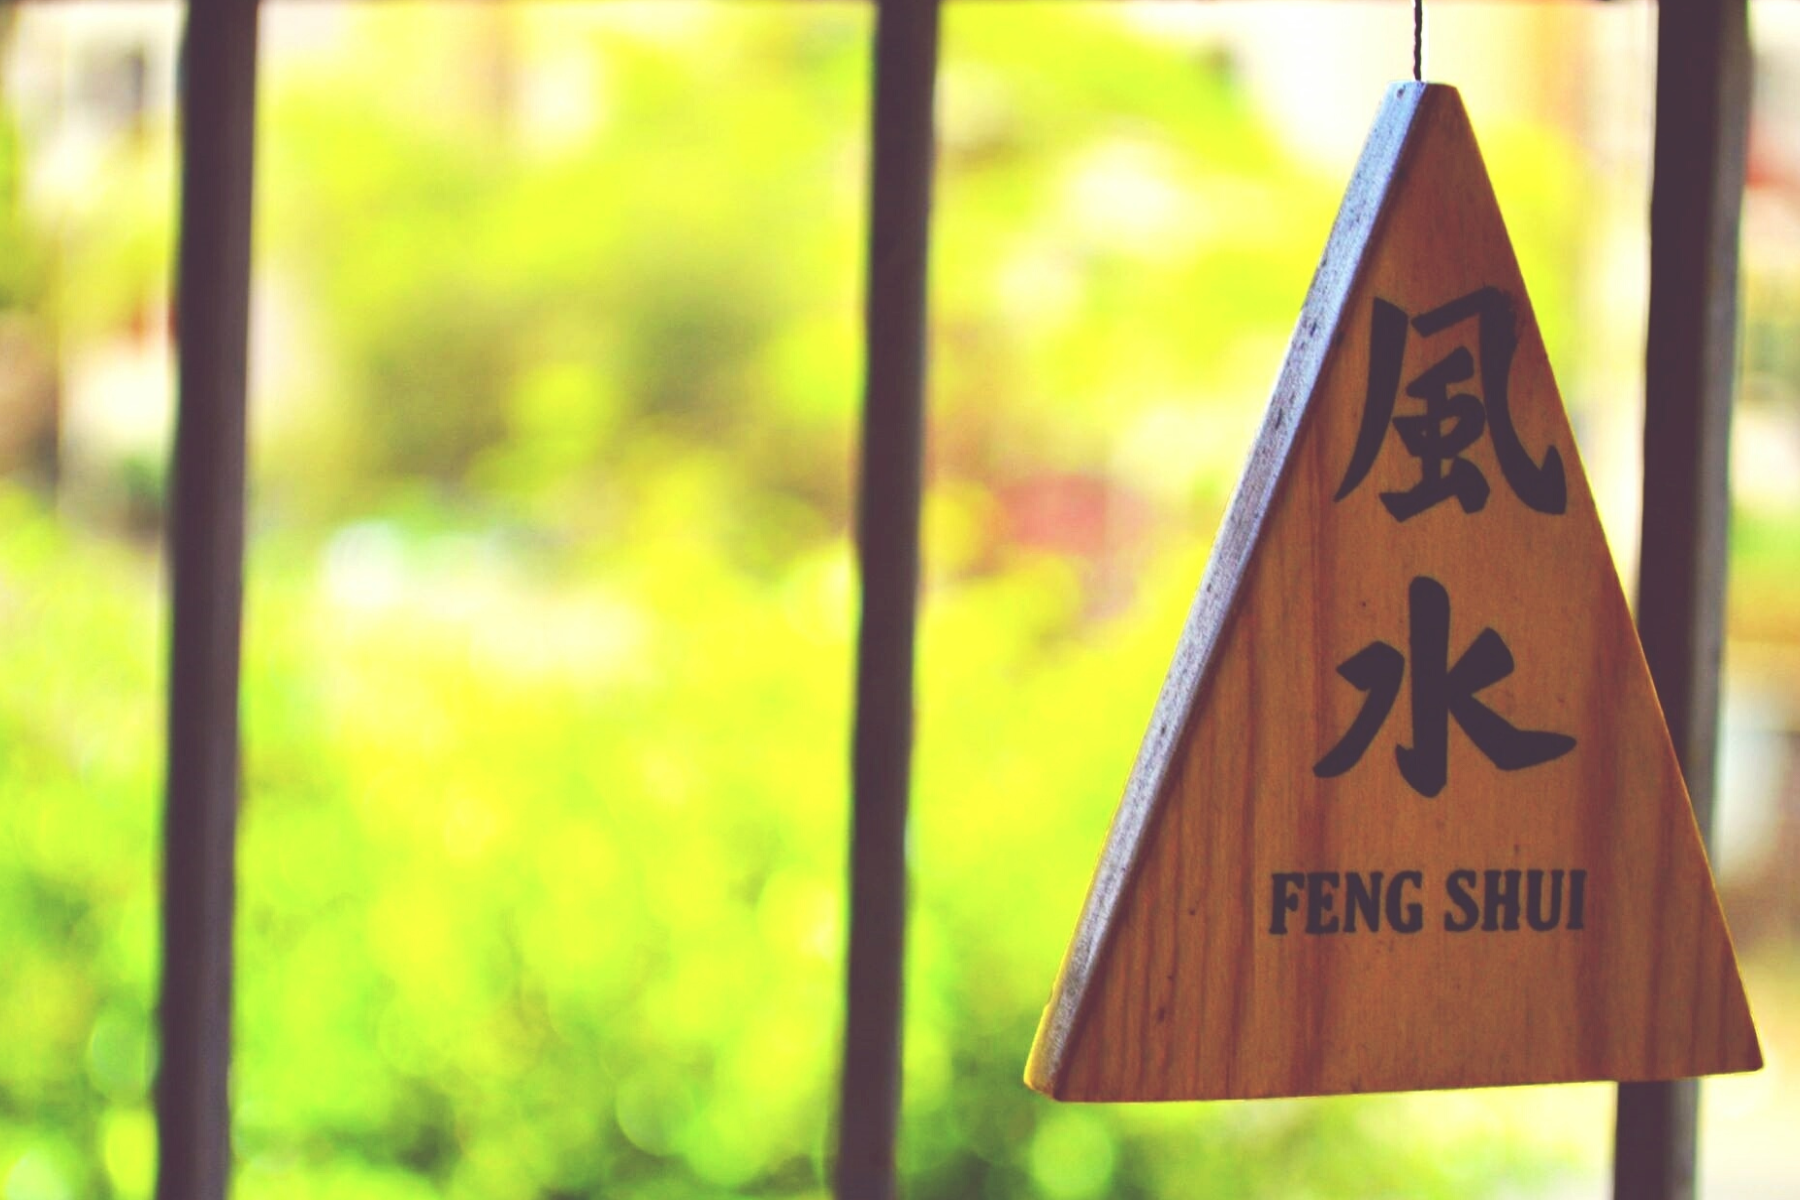 An image of a wooden triangle with the word "Feng Shui" written on it